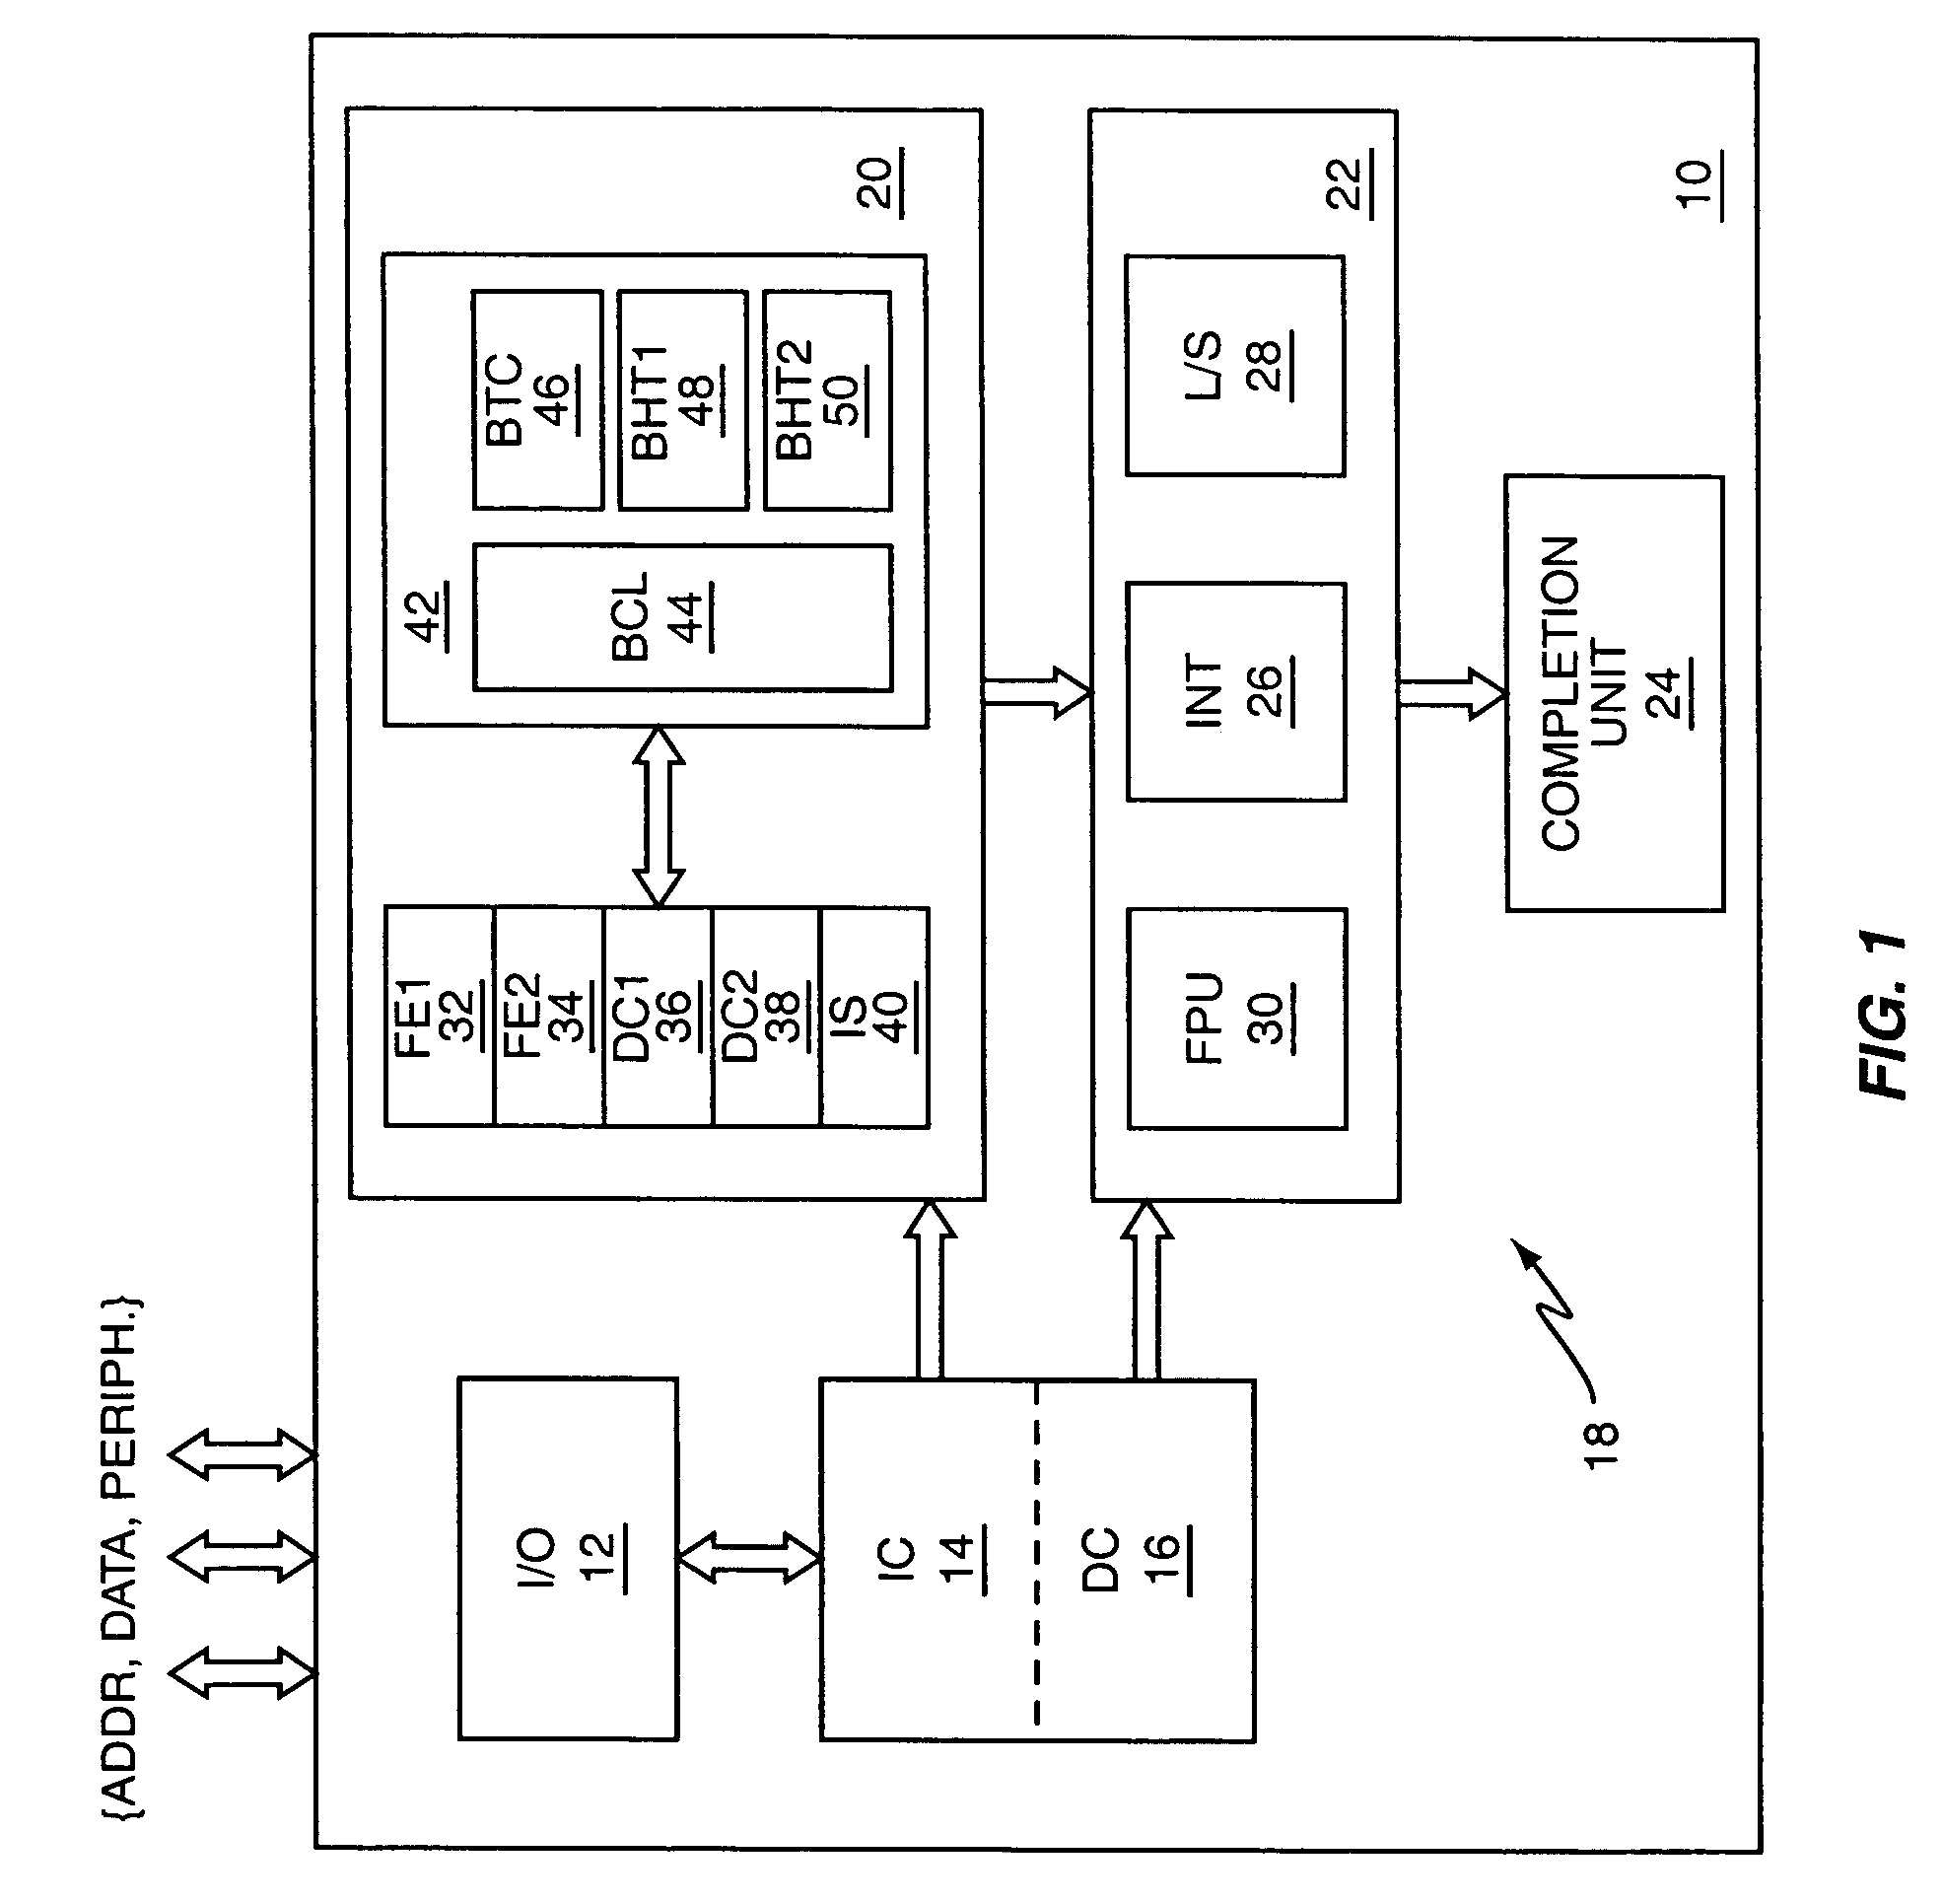 Method and apparatus for efficiently accessing first and second branch history tables to predict branch instructions